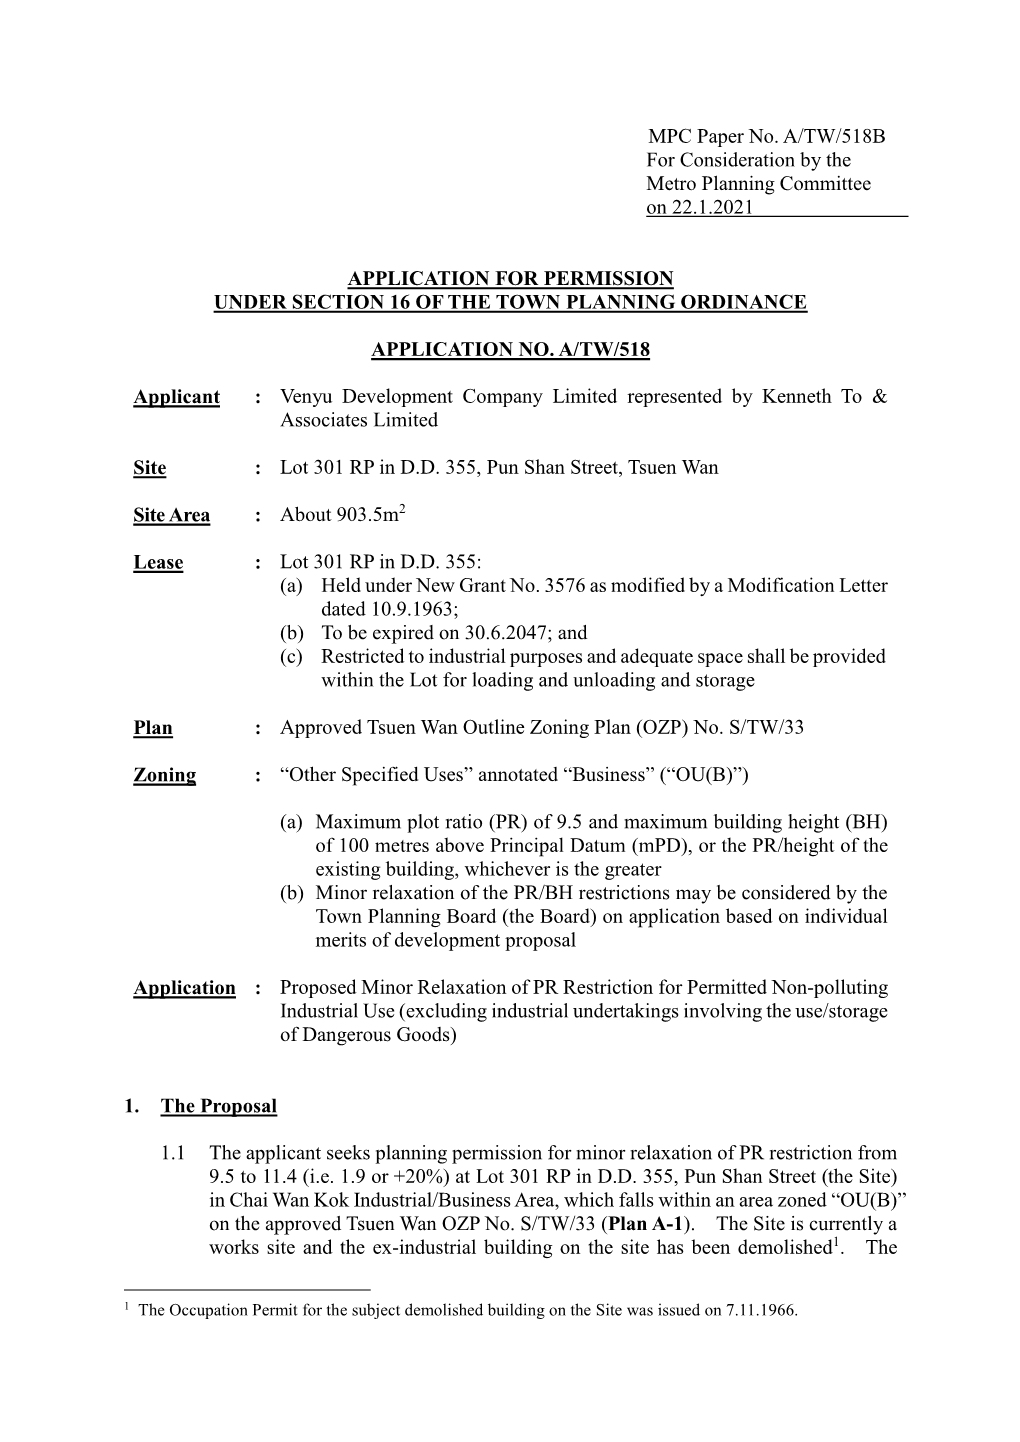 MPC Paper No. A/TW/518B for Consideration by the Metro Planning Committee on 22.1.2021